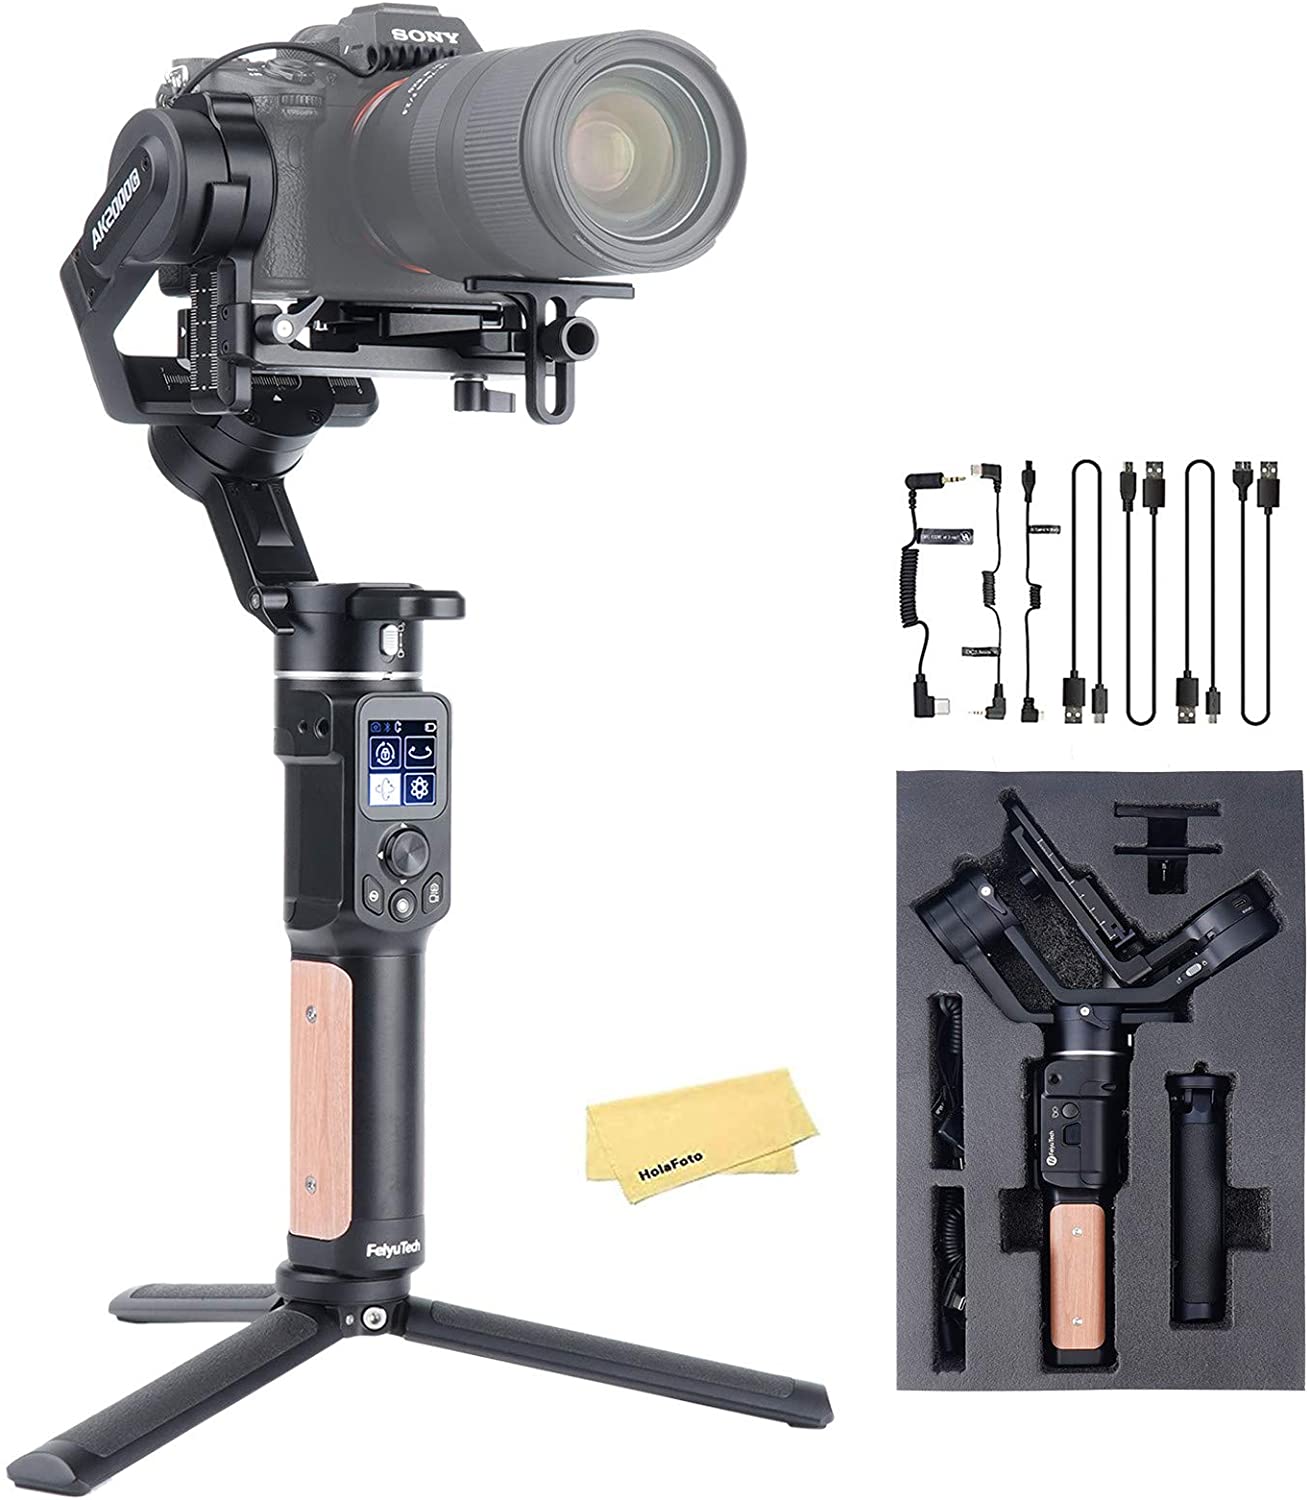 FeiyuTech Ak2000C Handheld Camera Gimbal Stabilizer for DSLR and